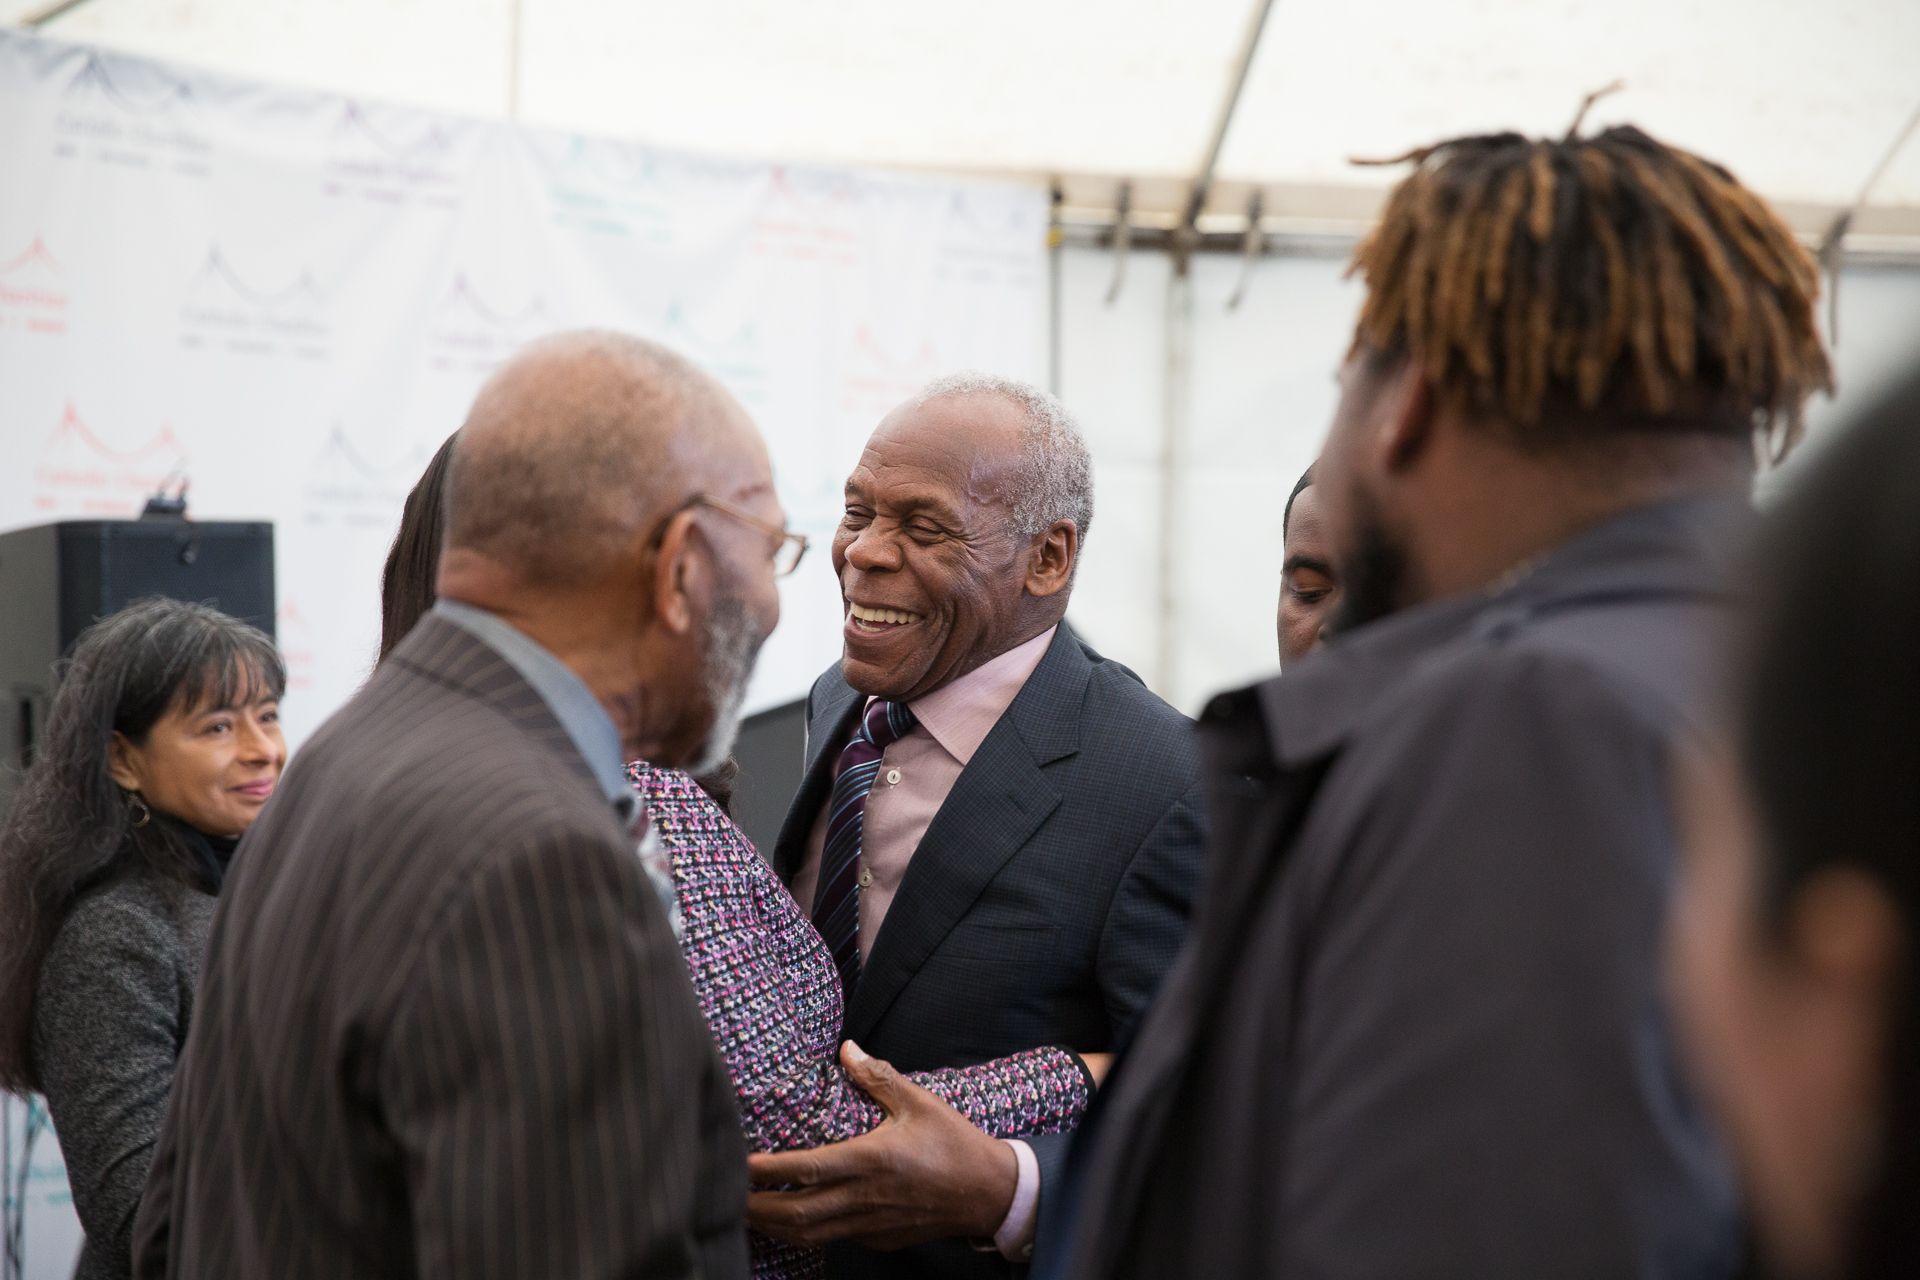 Danny Glover shared his experience growing up in the Bayview neighborhood and his vision for social justice and equality.